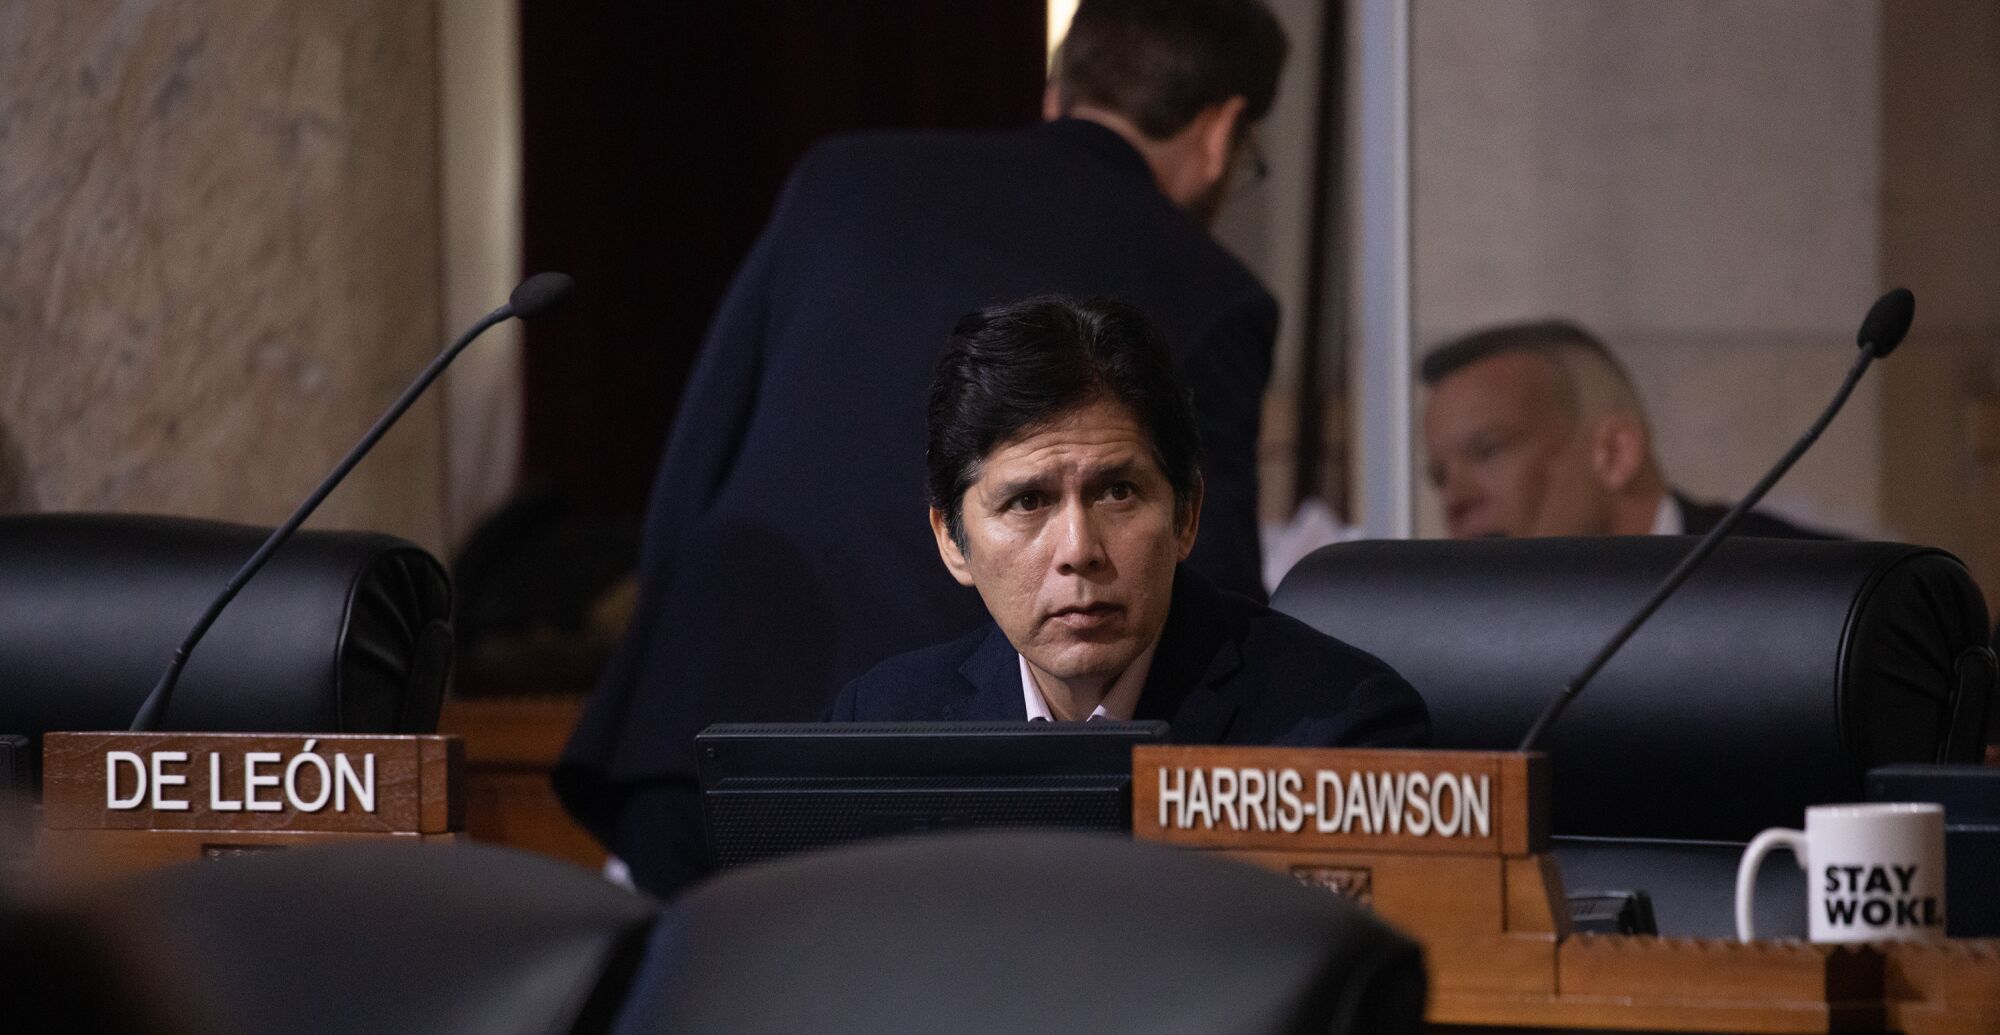 Kevin de León sitting in a meeting with a furrowed brow.